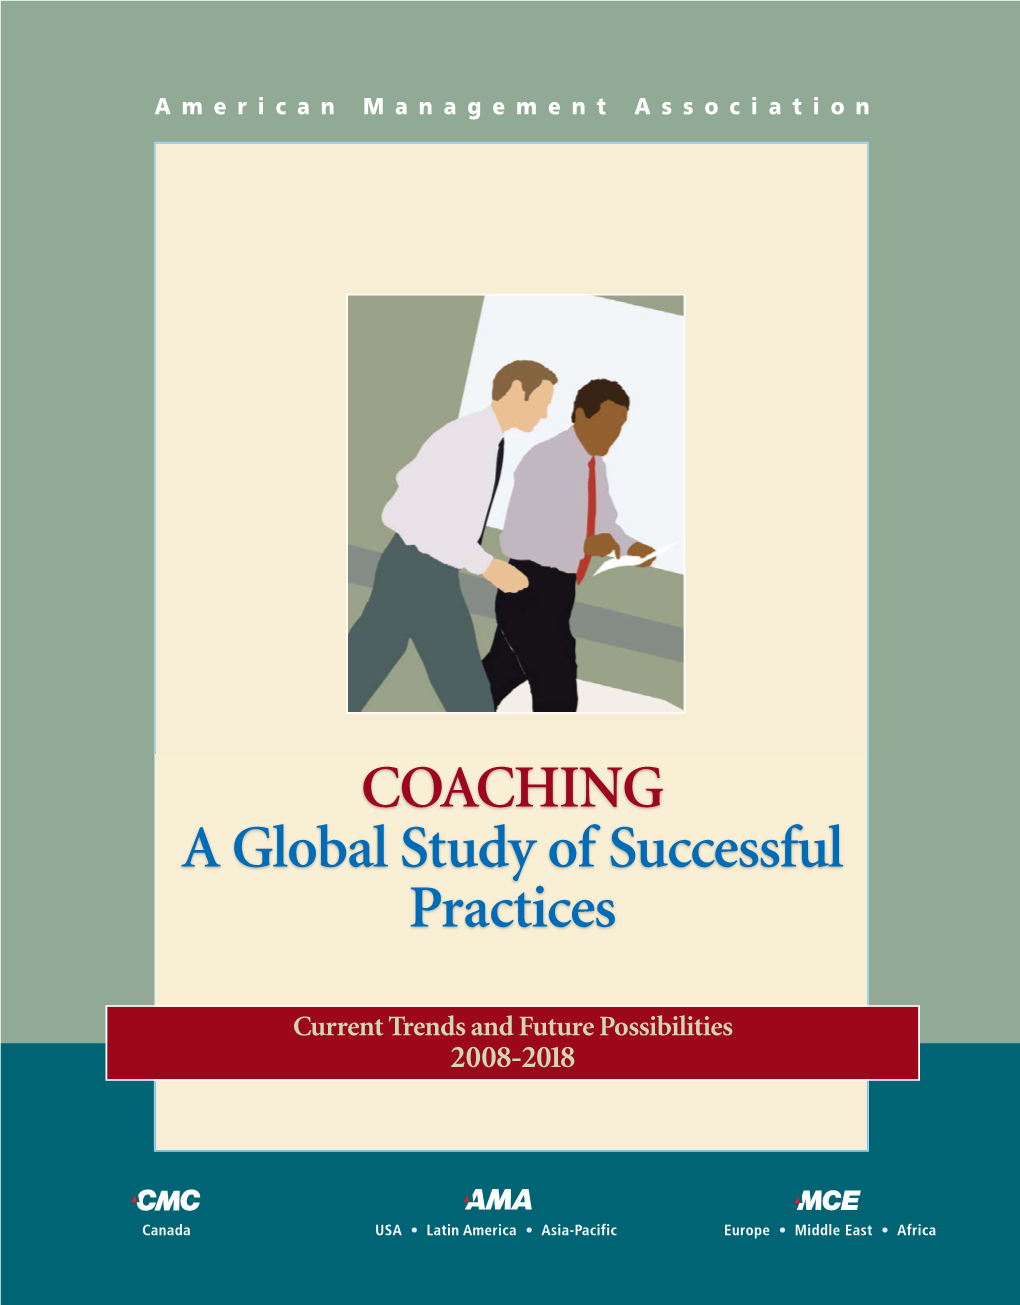 COACHING a Global Study of Successful Practices